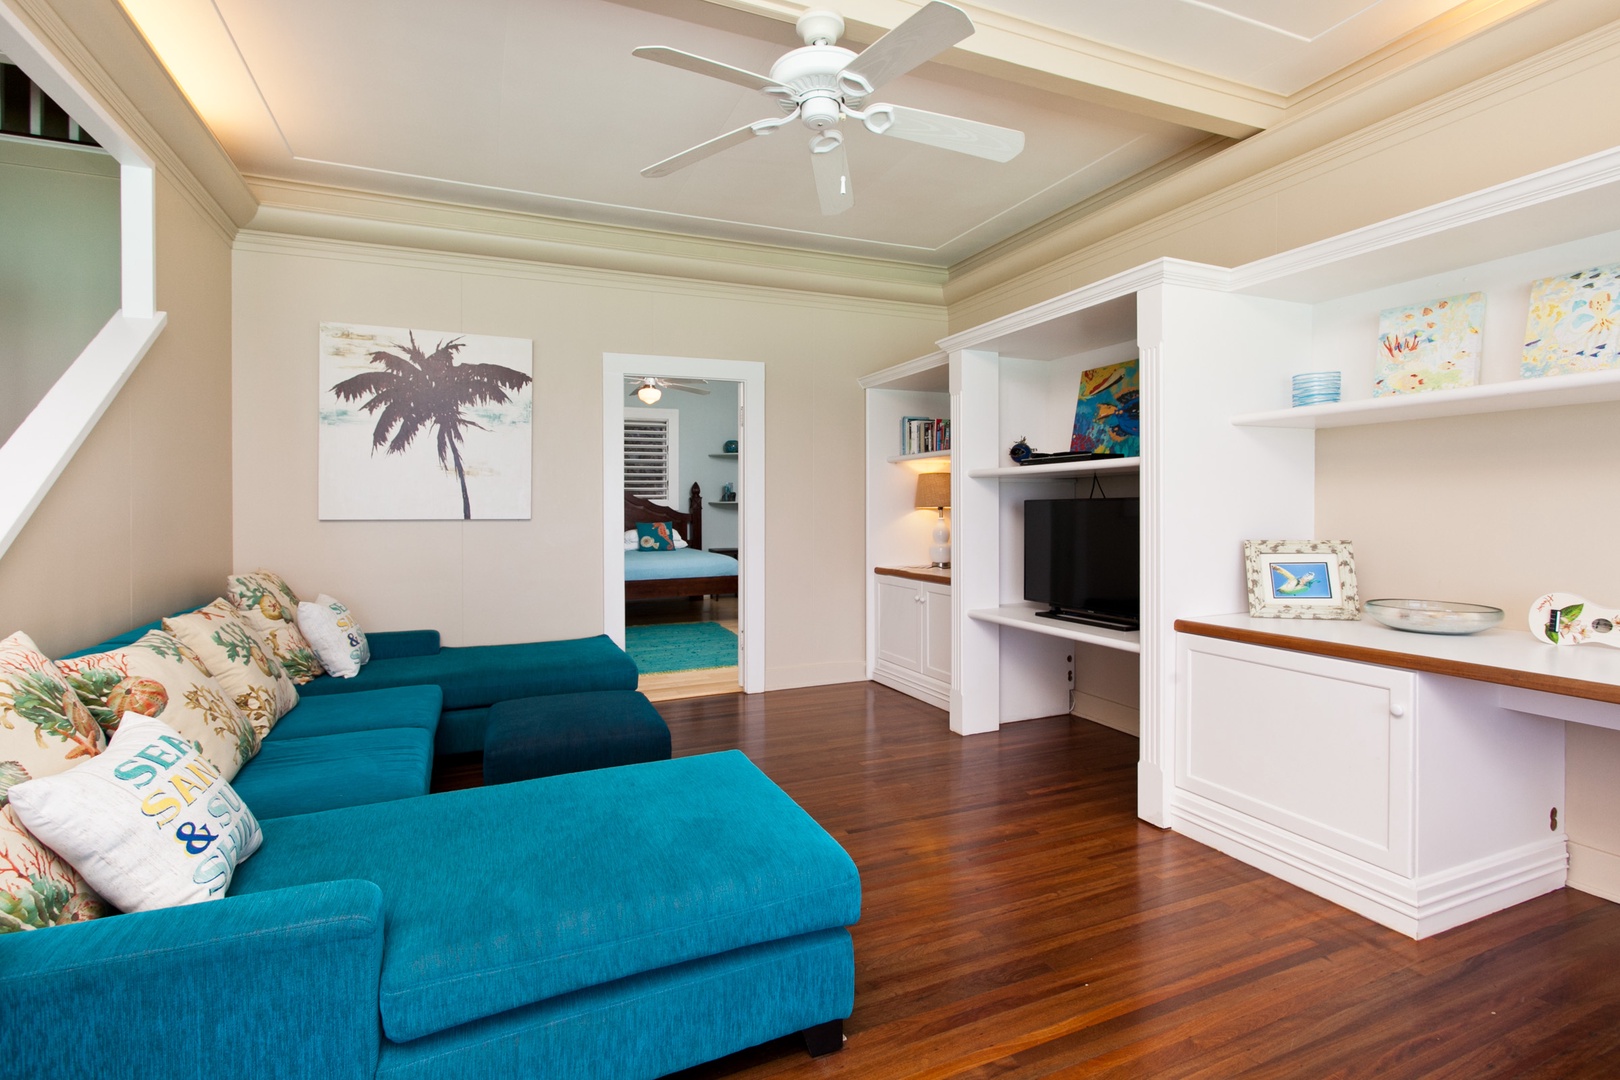 Kailua Vacation Rentals, Hale Mahina Lanikai* - Adorned with a plush sectional blue couch and a smart TV.